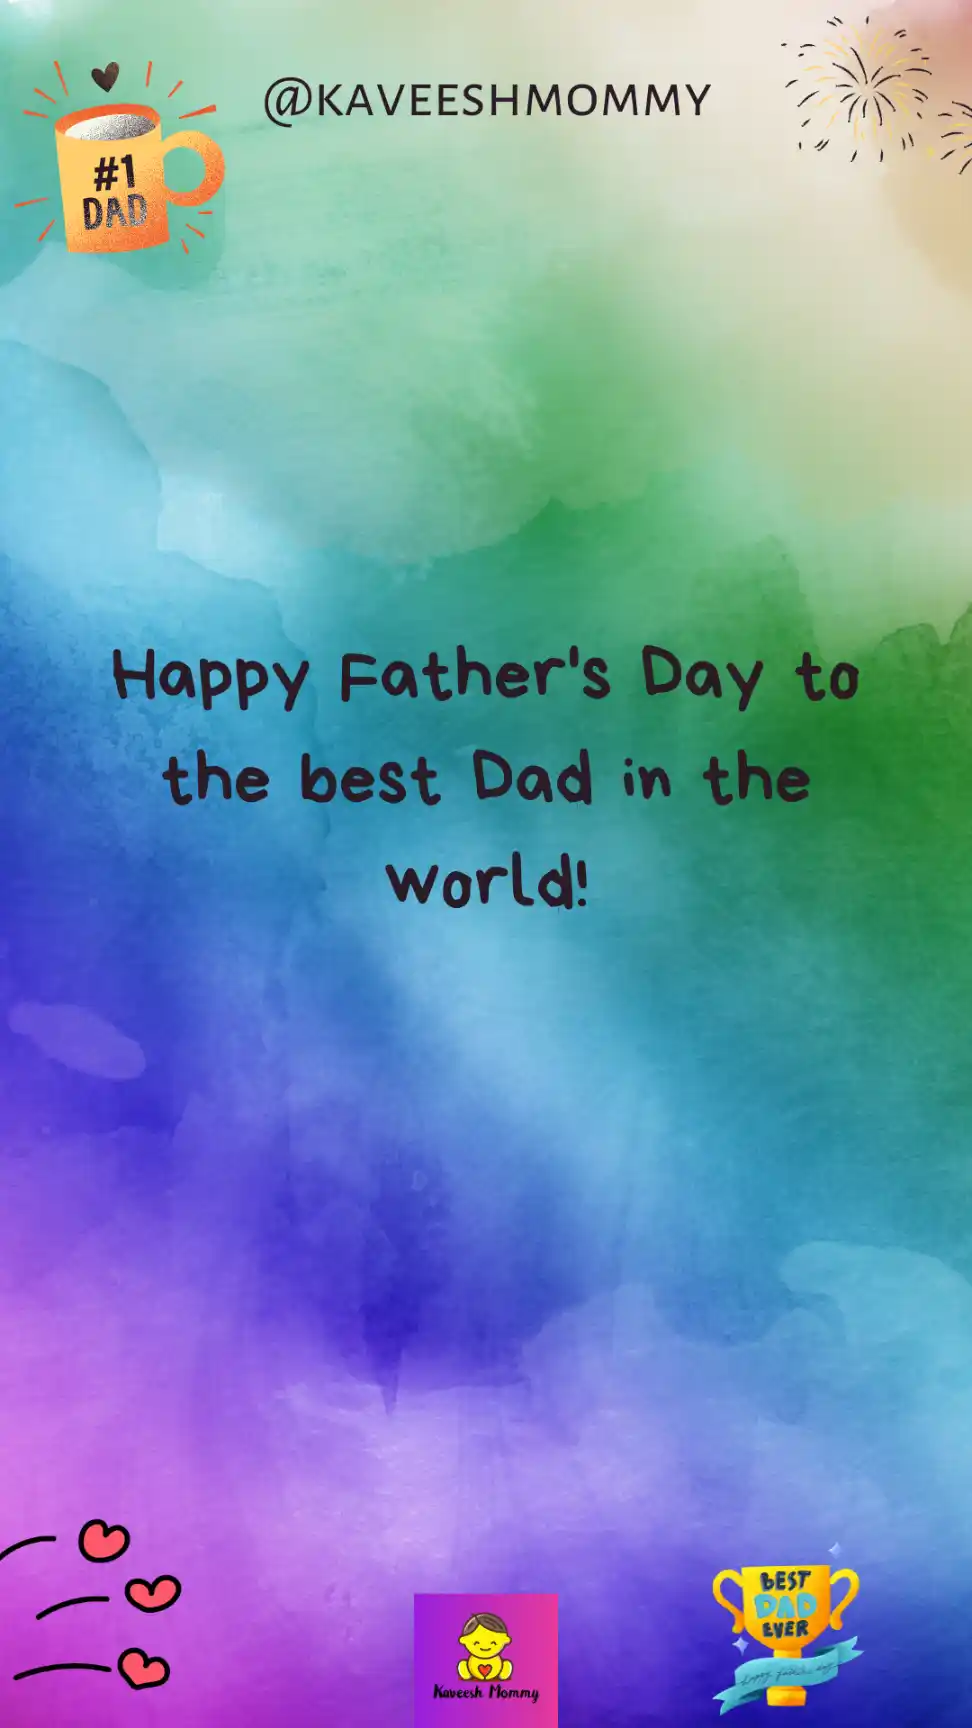 happy fathers day grandpa quotes-Happy Father's Day to the best Dad in the world!